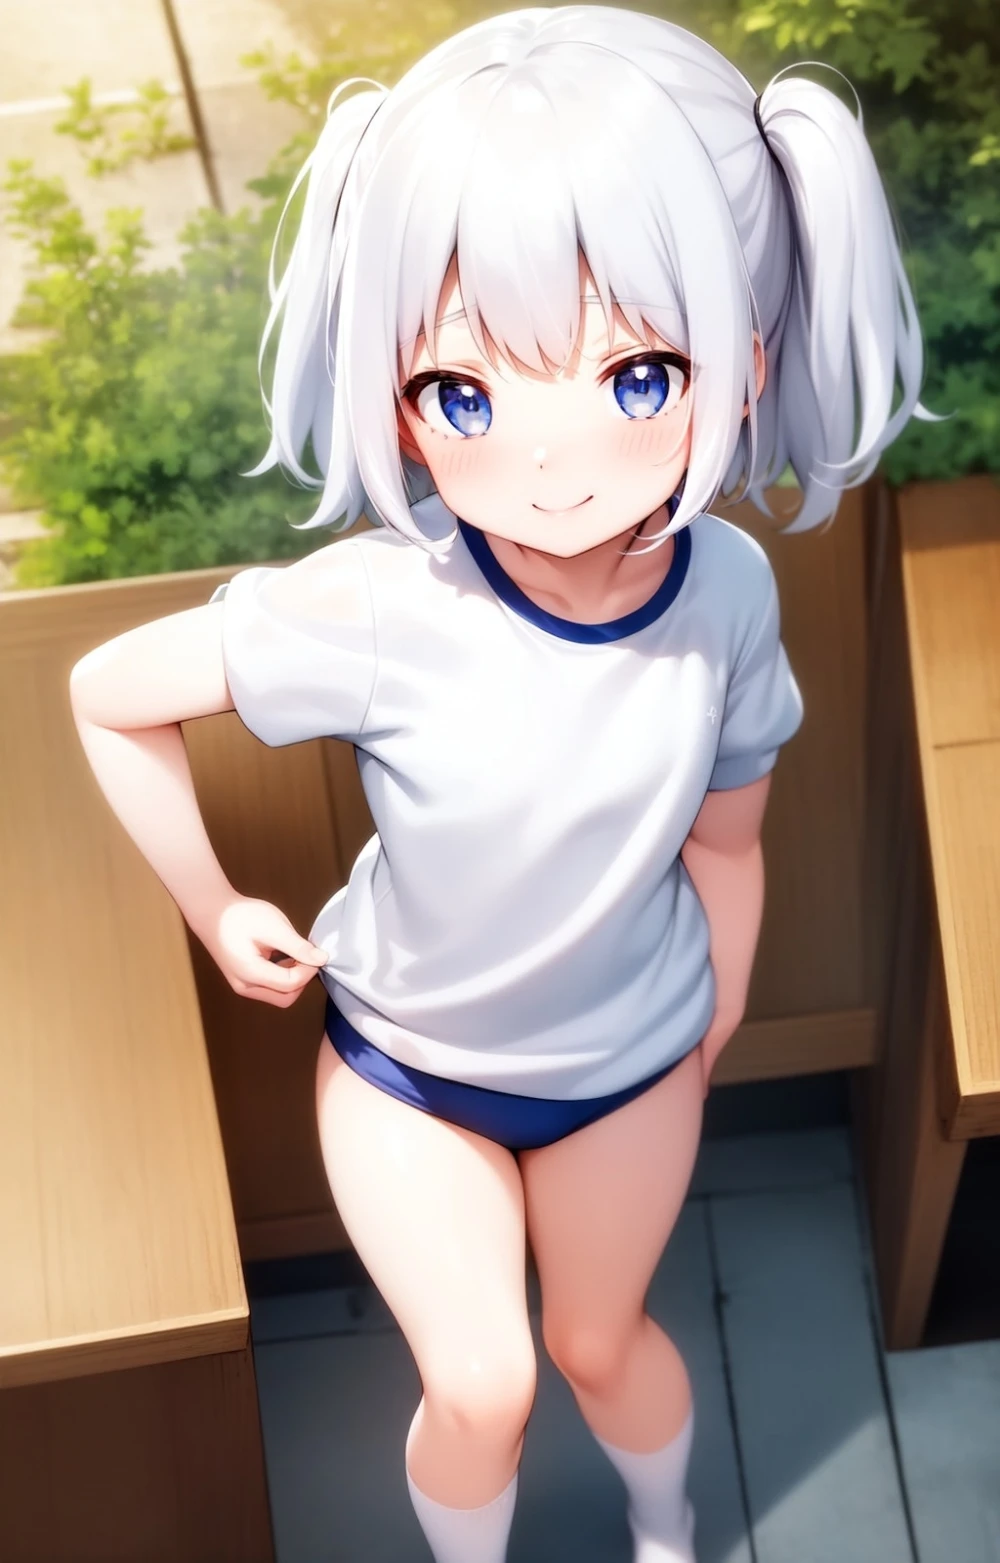 bloomers-anime-style-all-ages-2-48